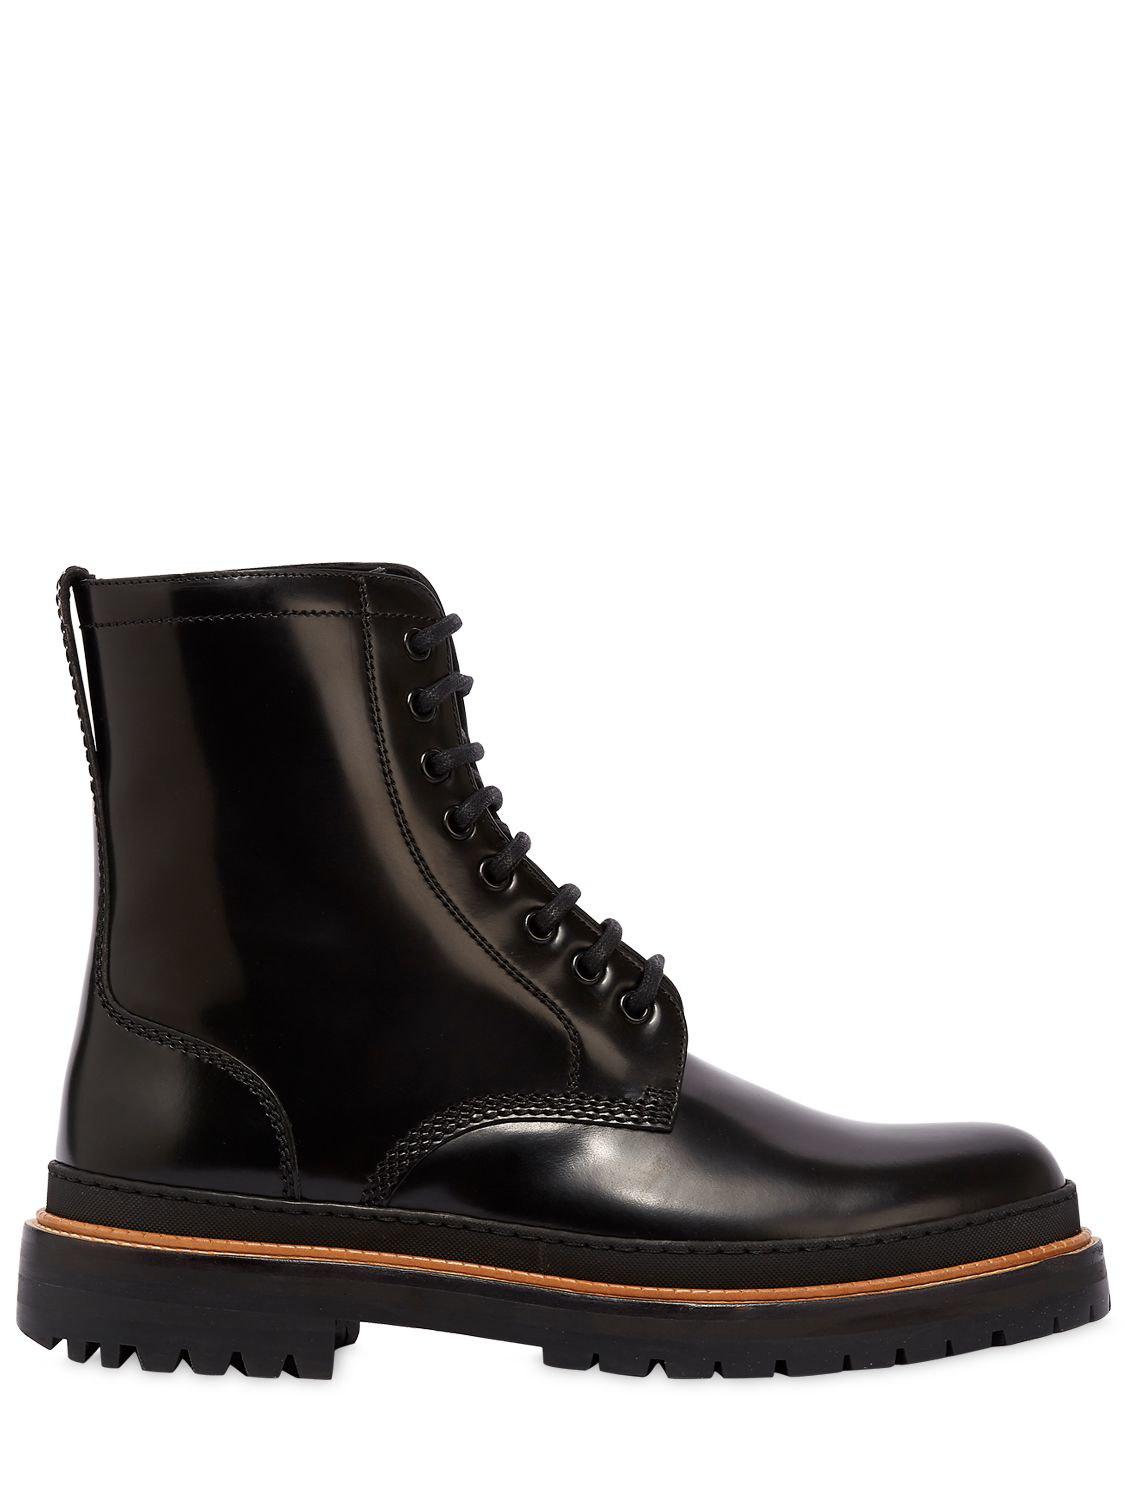 Burberry Polished Leather Lace-up Boots in Black for Men - Lyst